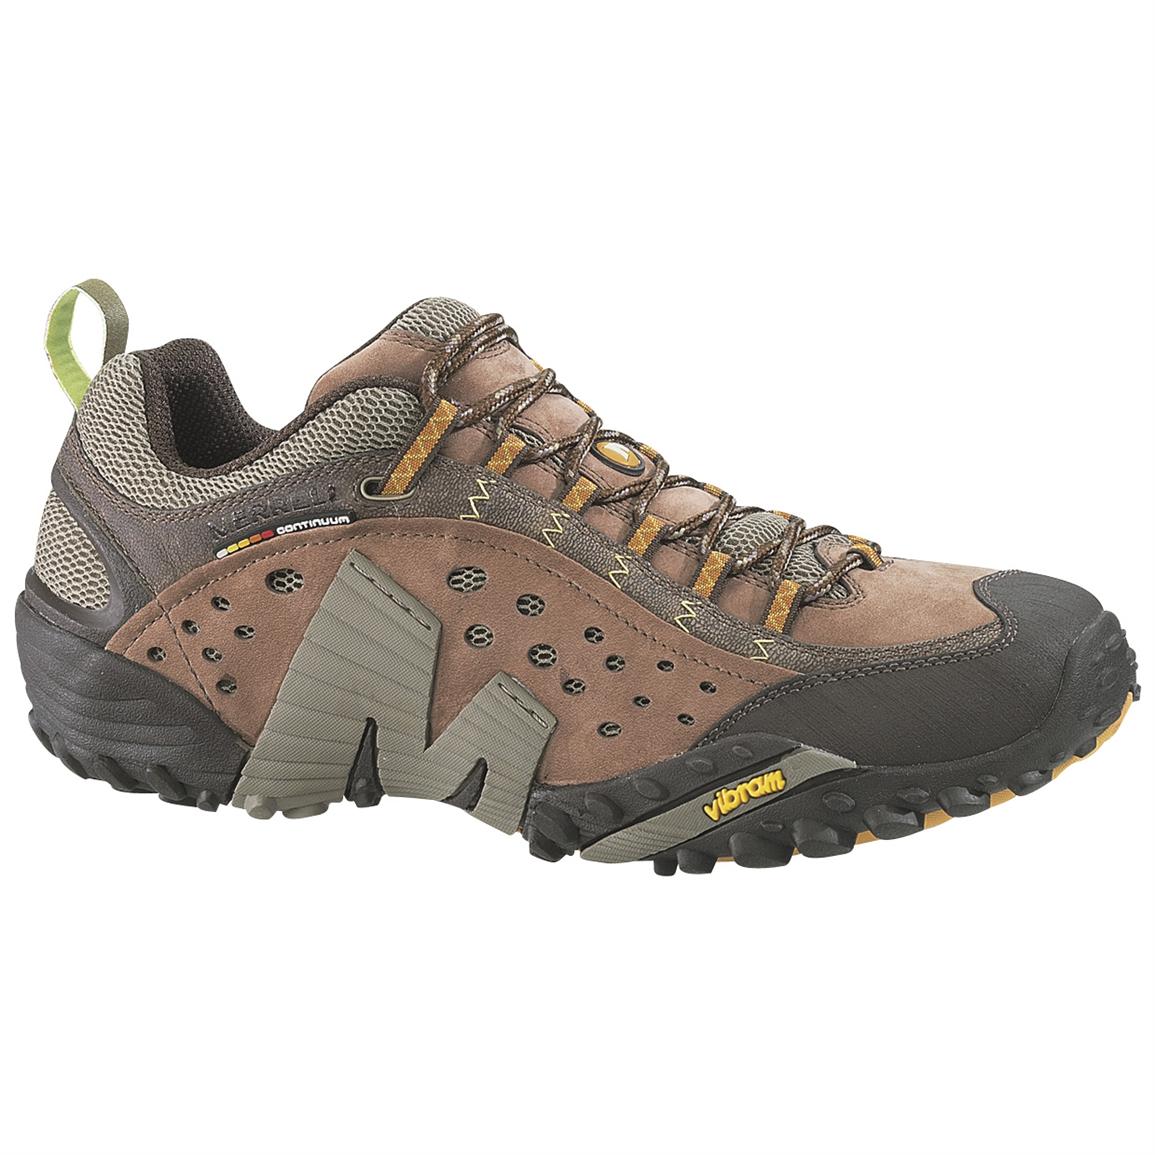 Merrell® Men's Intercept Shoes - 139907, Casual Shoes at Sportsman's Guide